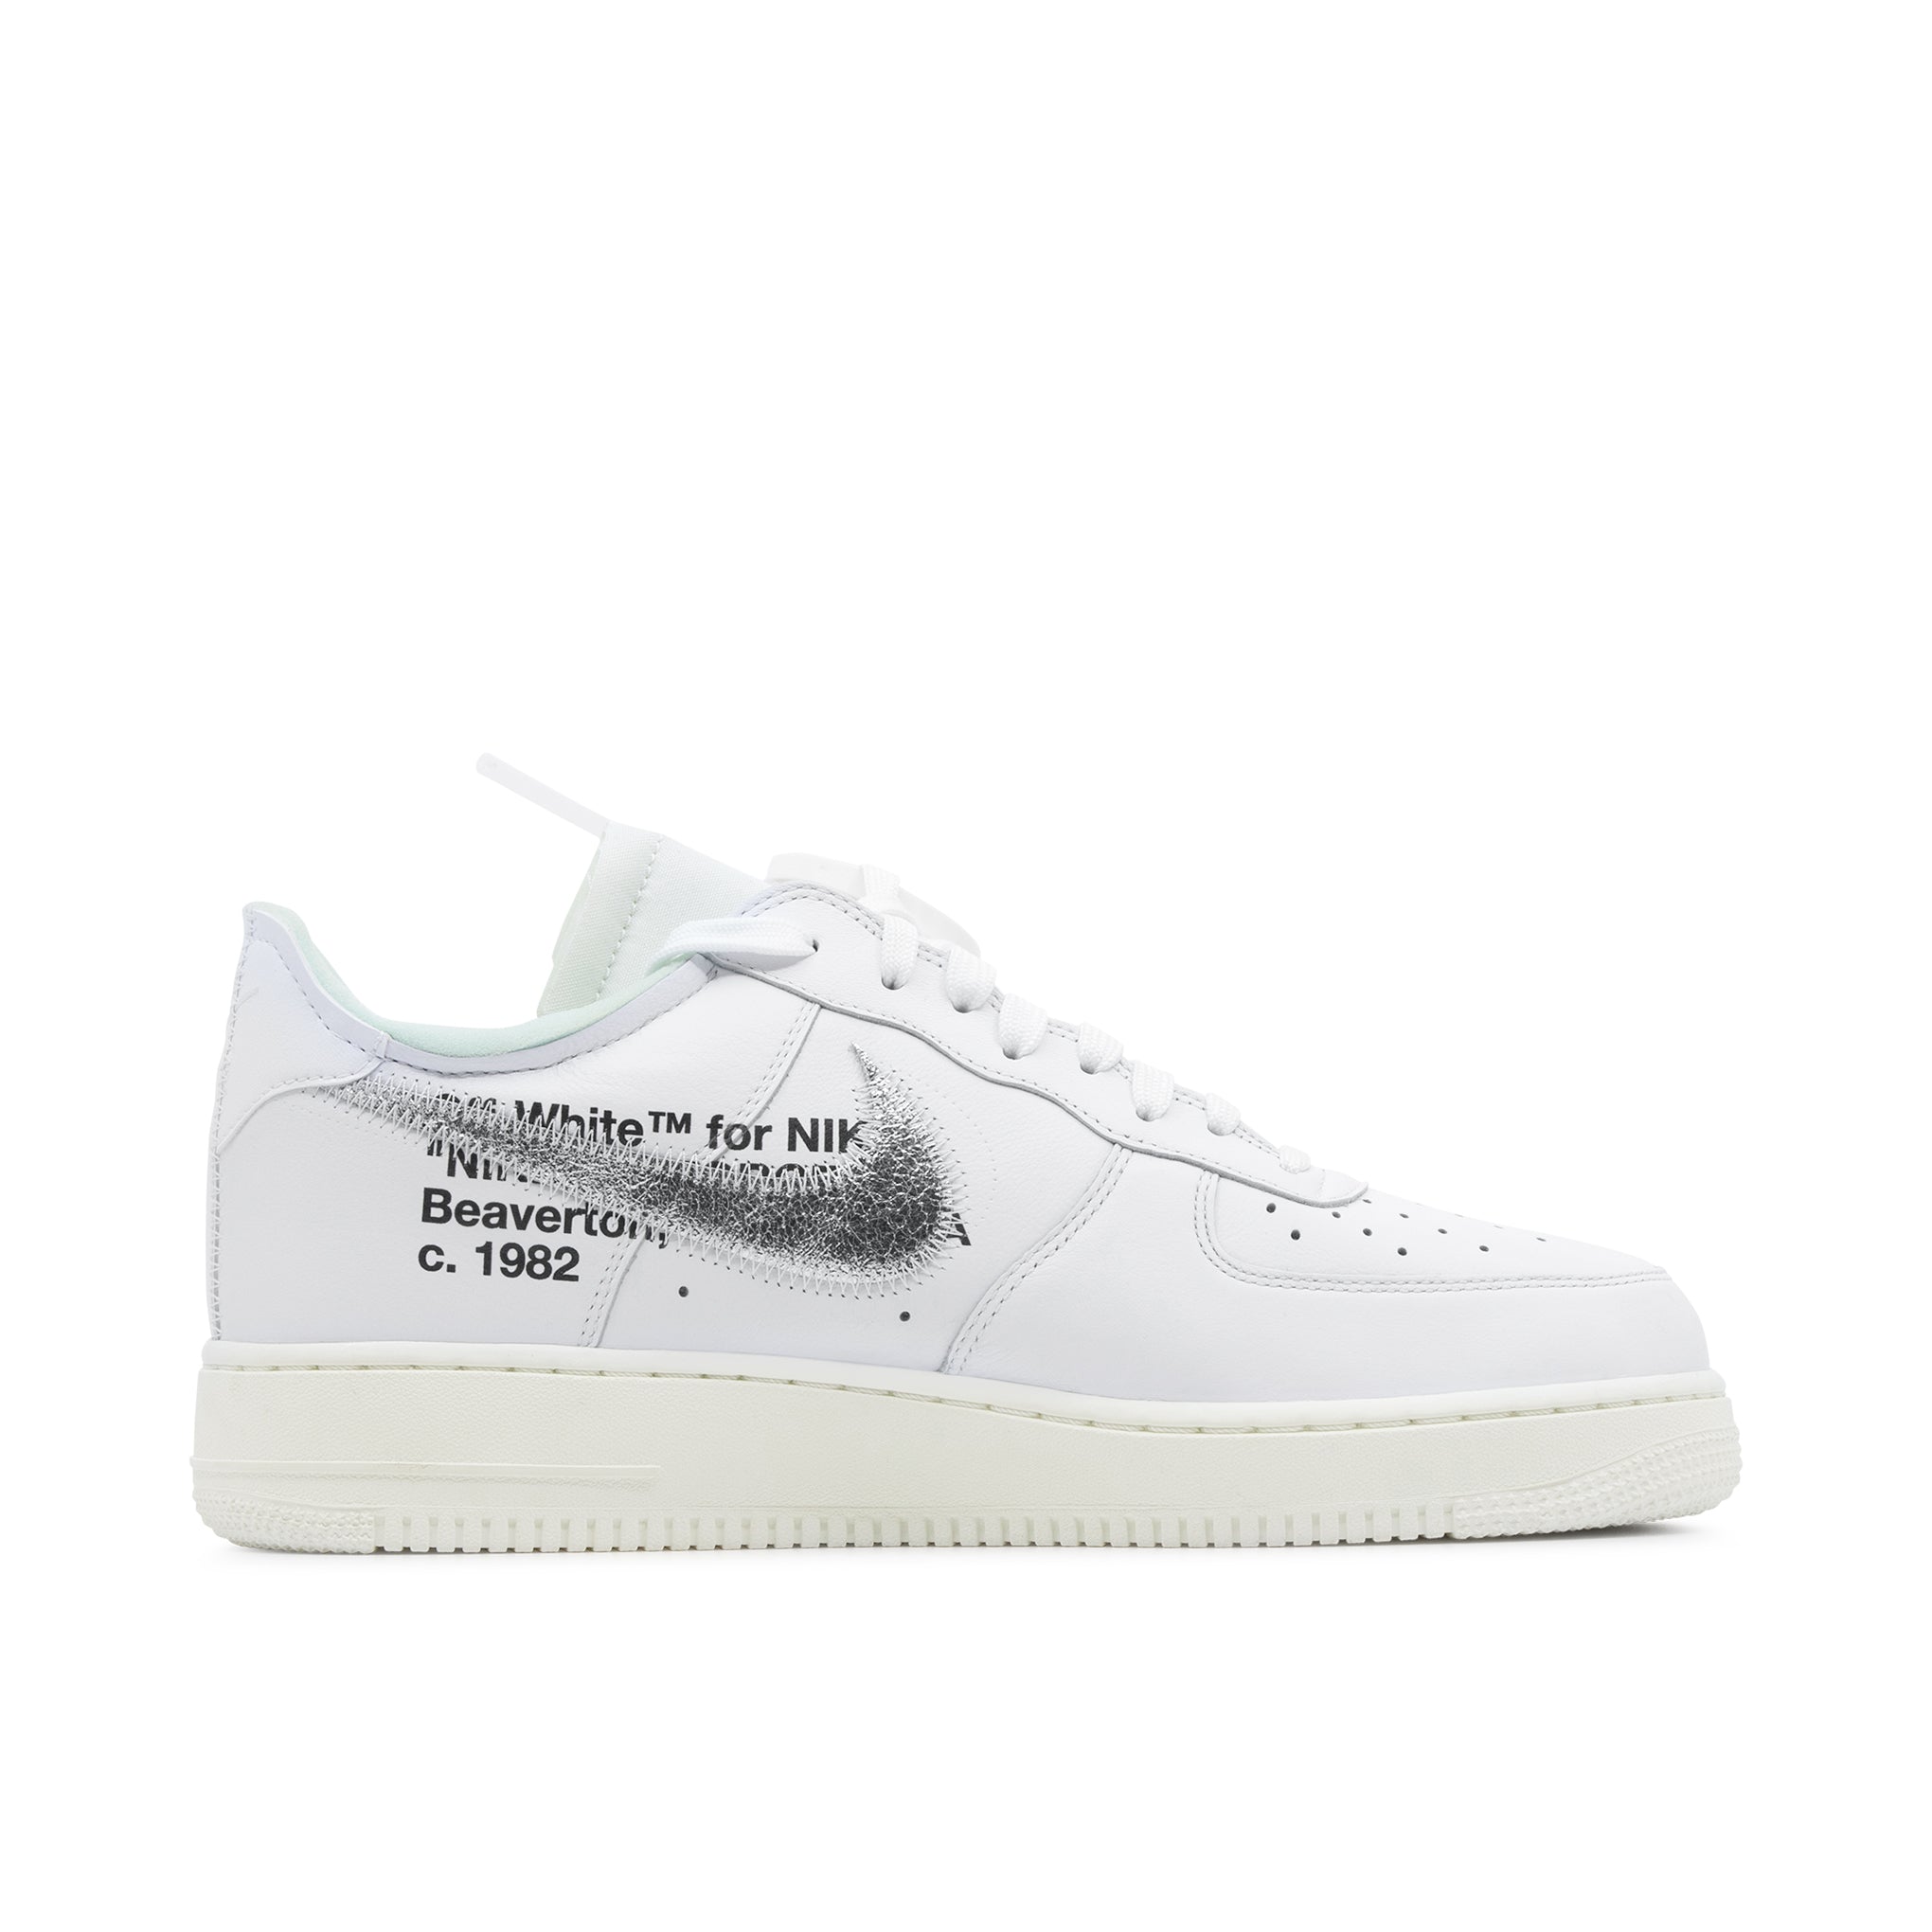 Off-White Nike Air Force 1 Low ComplexCon AO4297-100 - Sneaker Bar Detroit